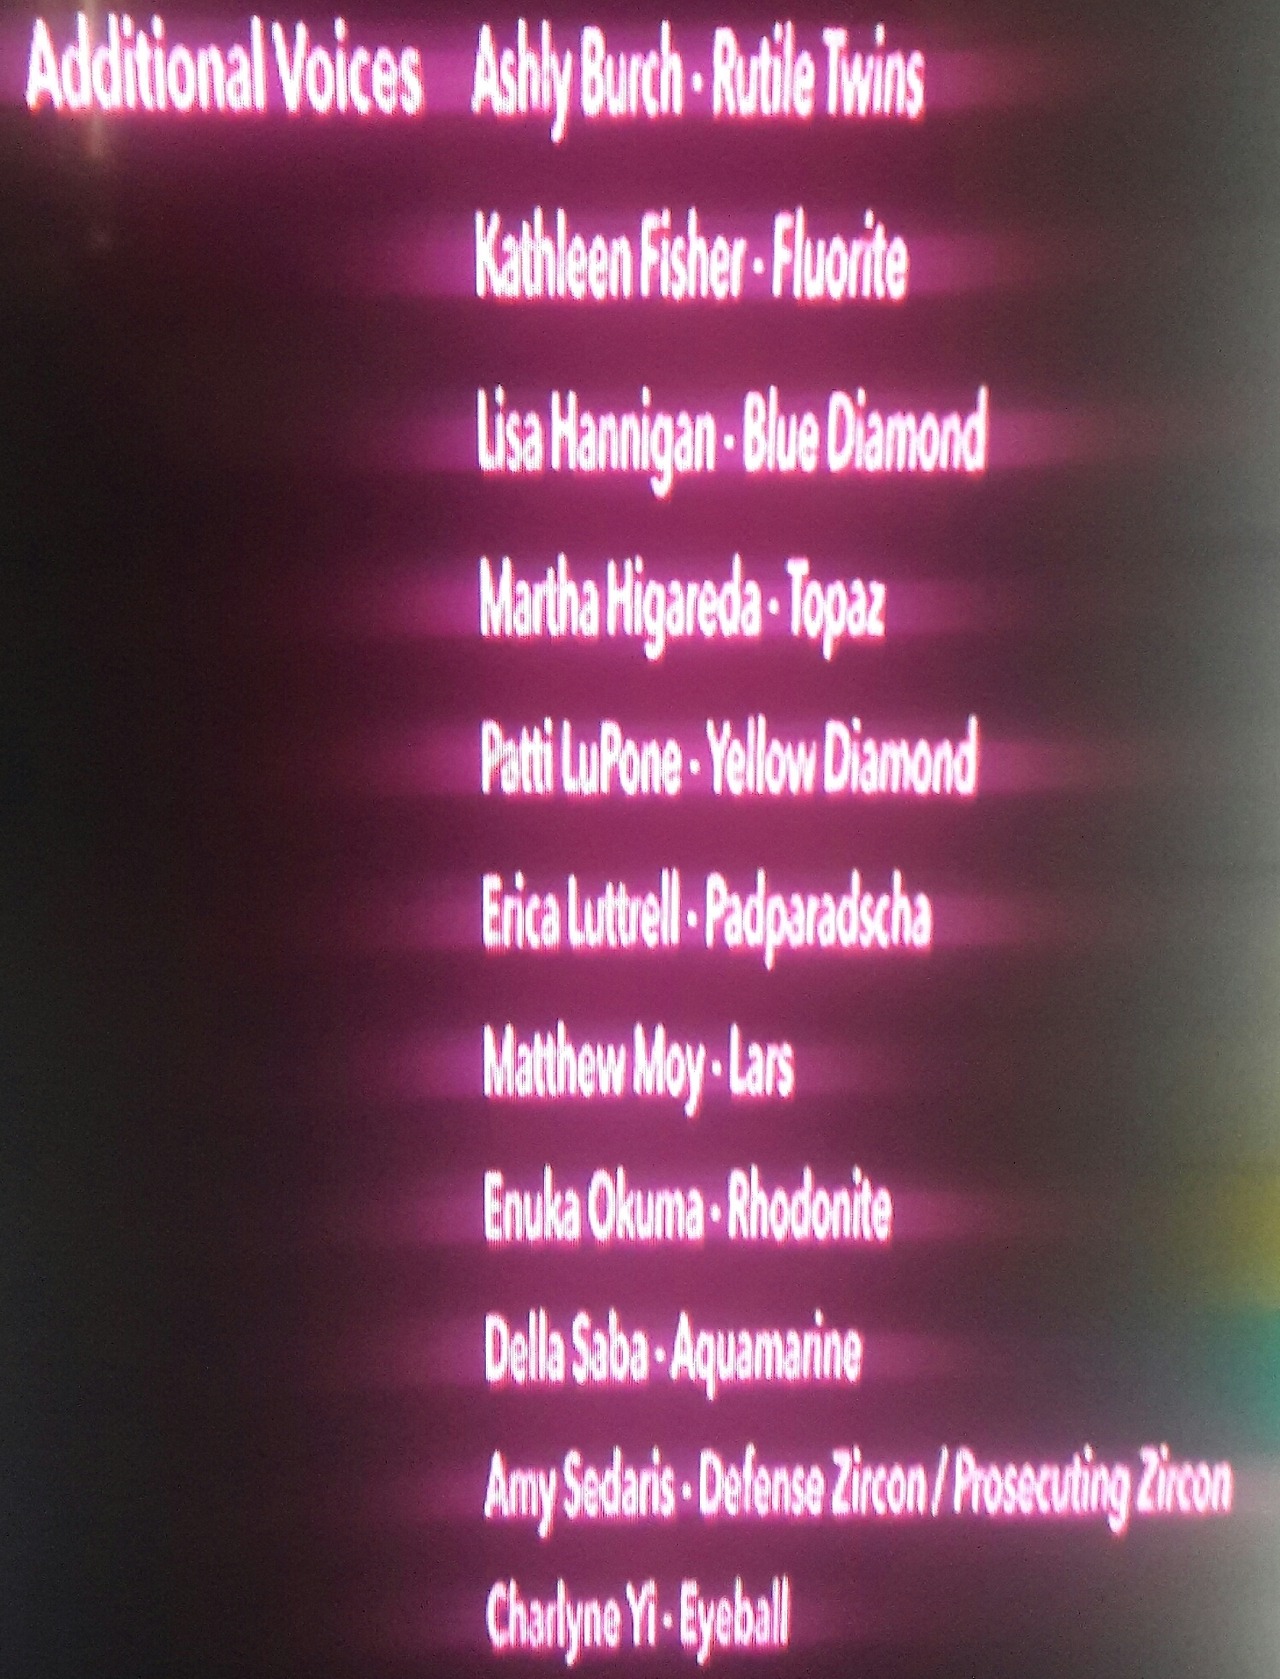 Wanted&rsquo;s voice credits, in case you guys wanted to see who the VAs for